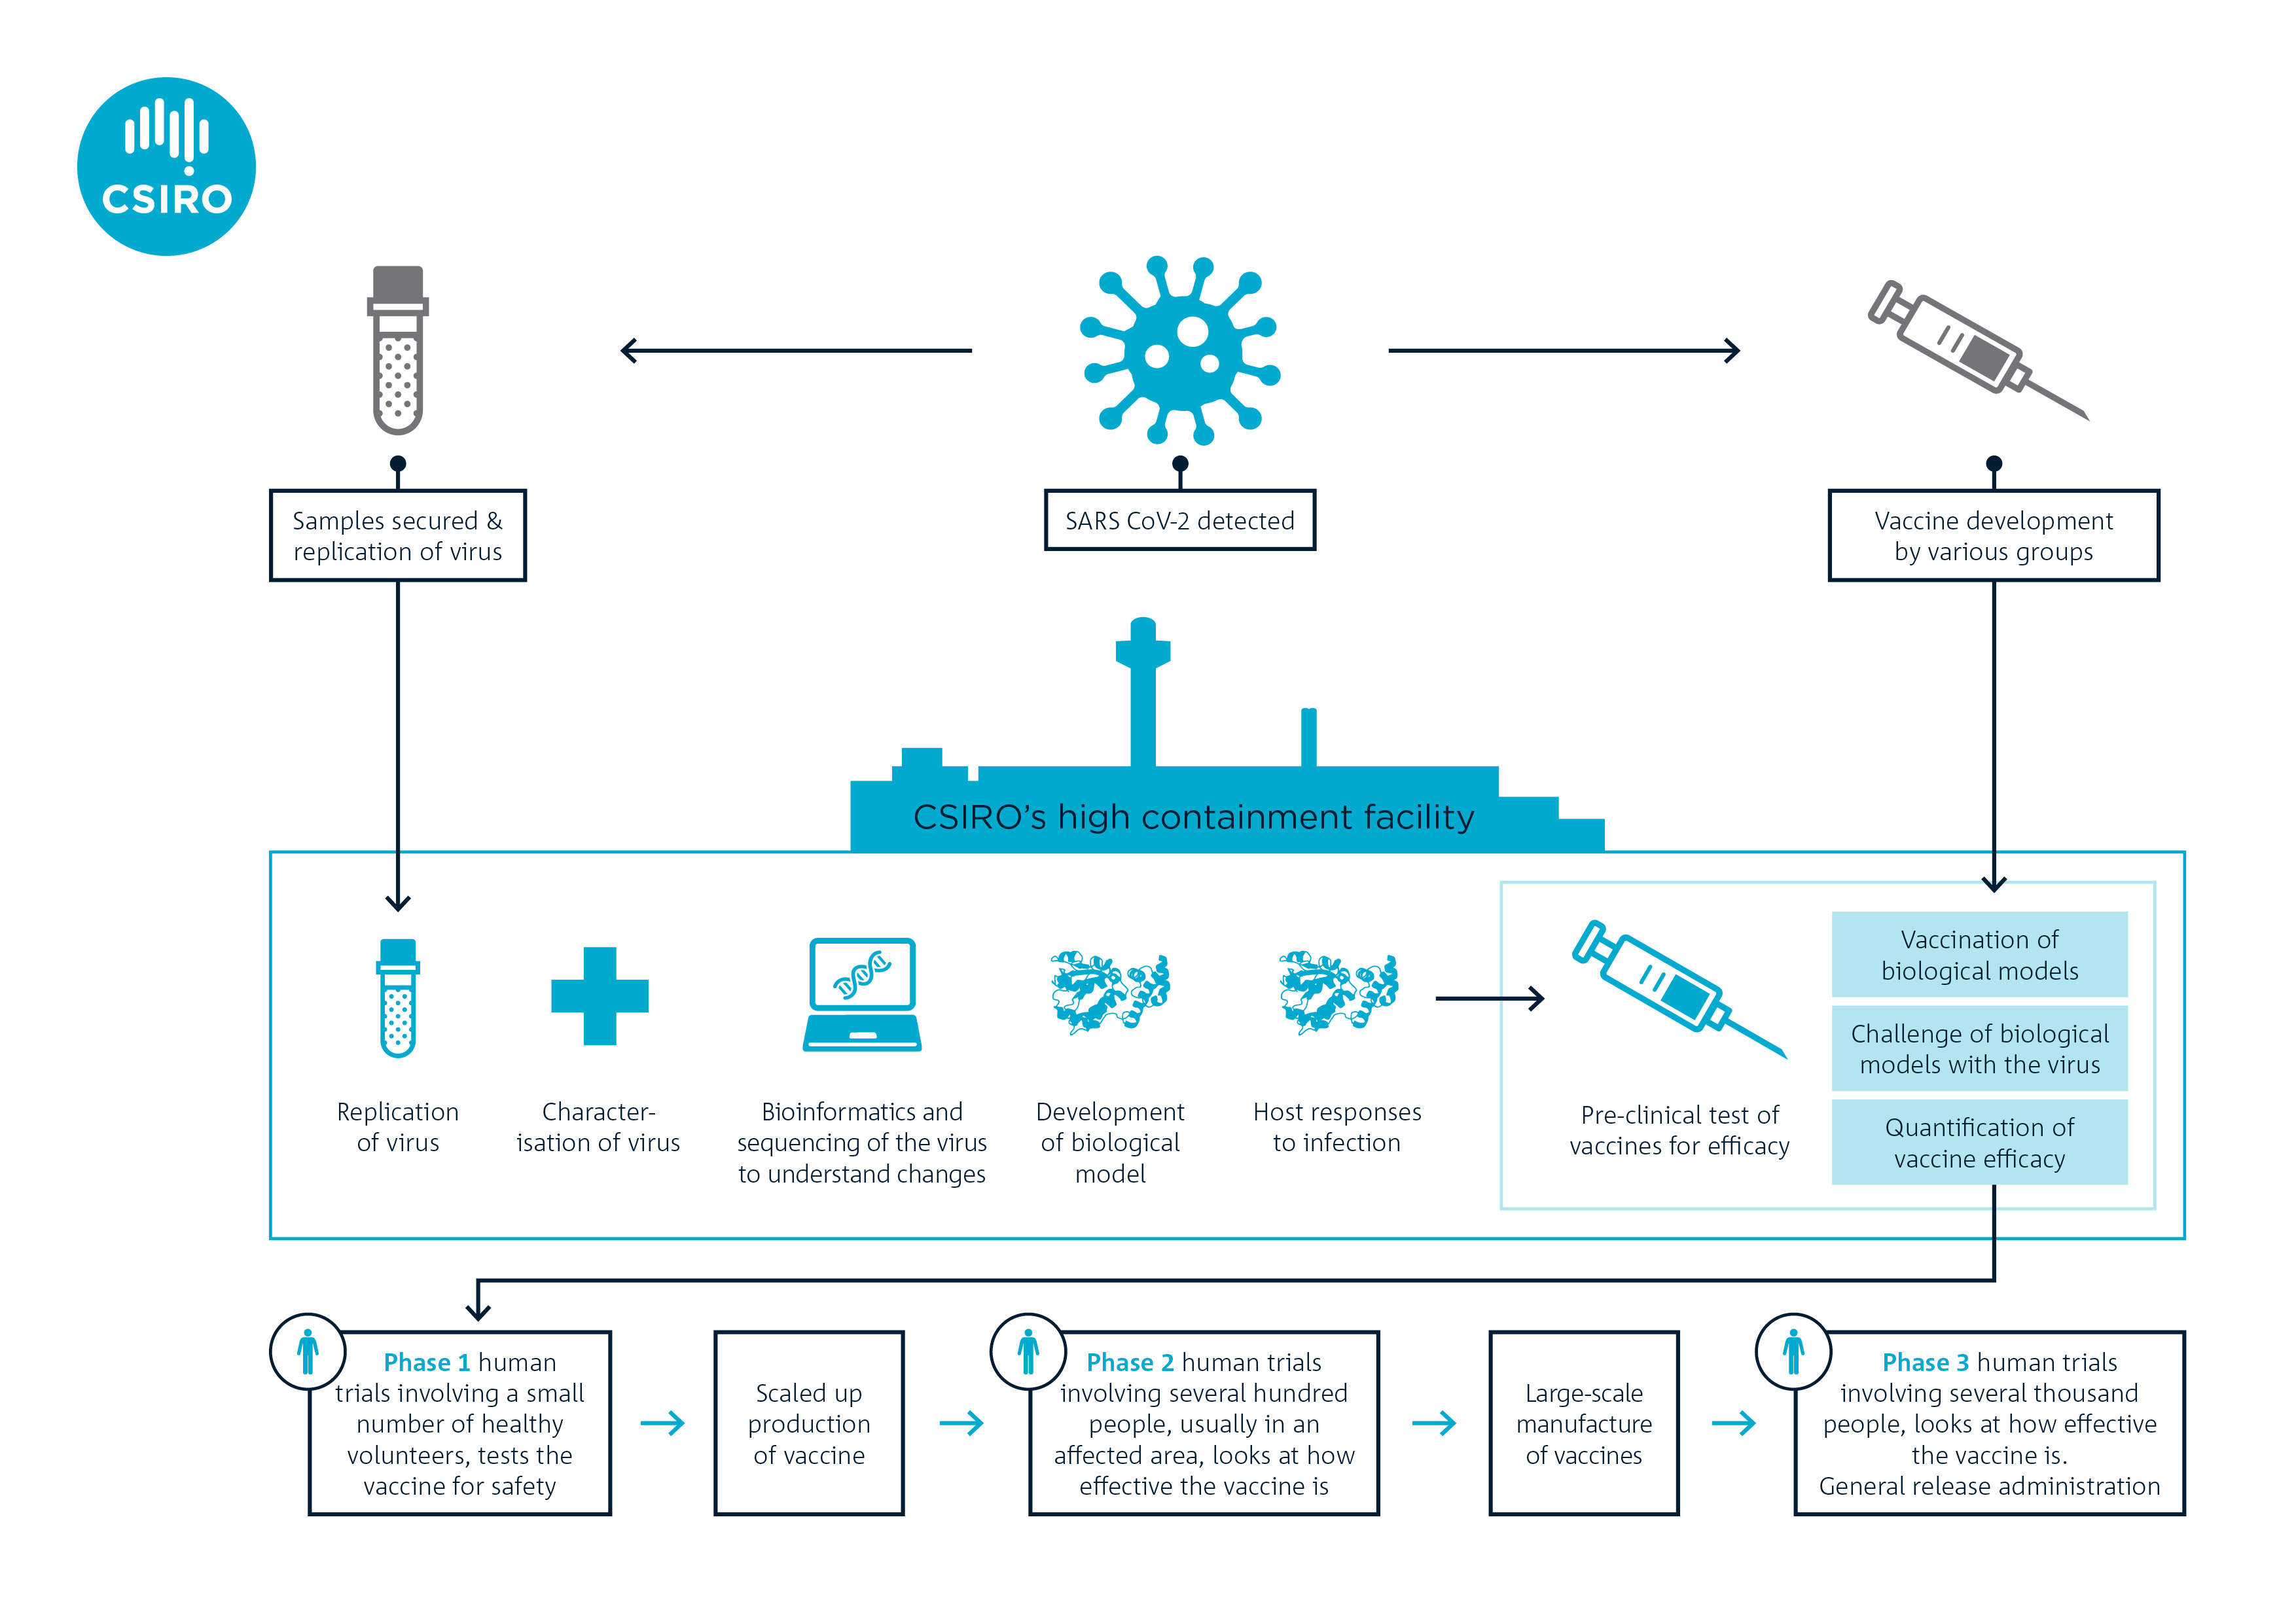 Infographic showing the steps involved in the COVID-19 vaccine development, trials and manufacture.